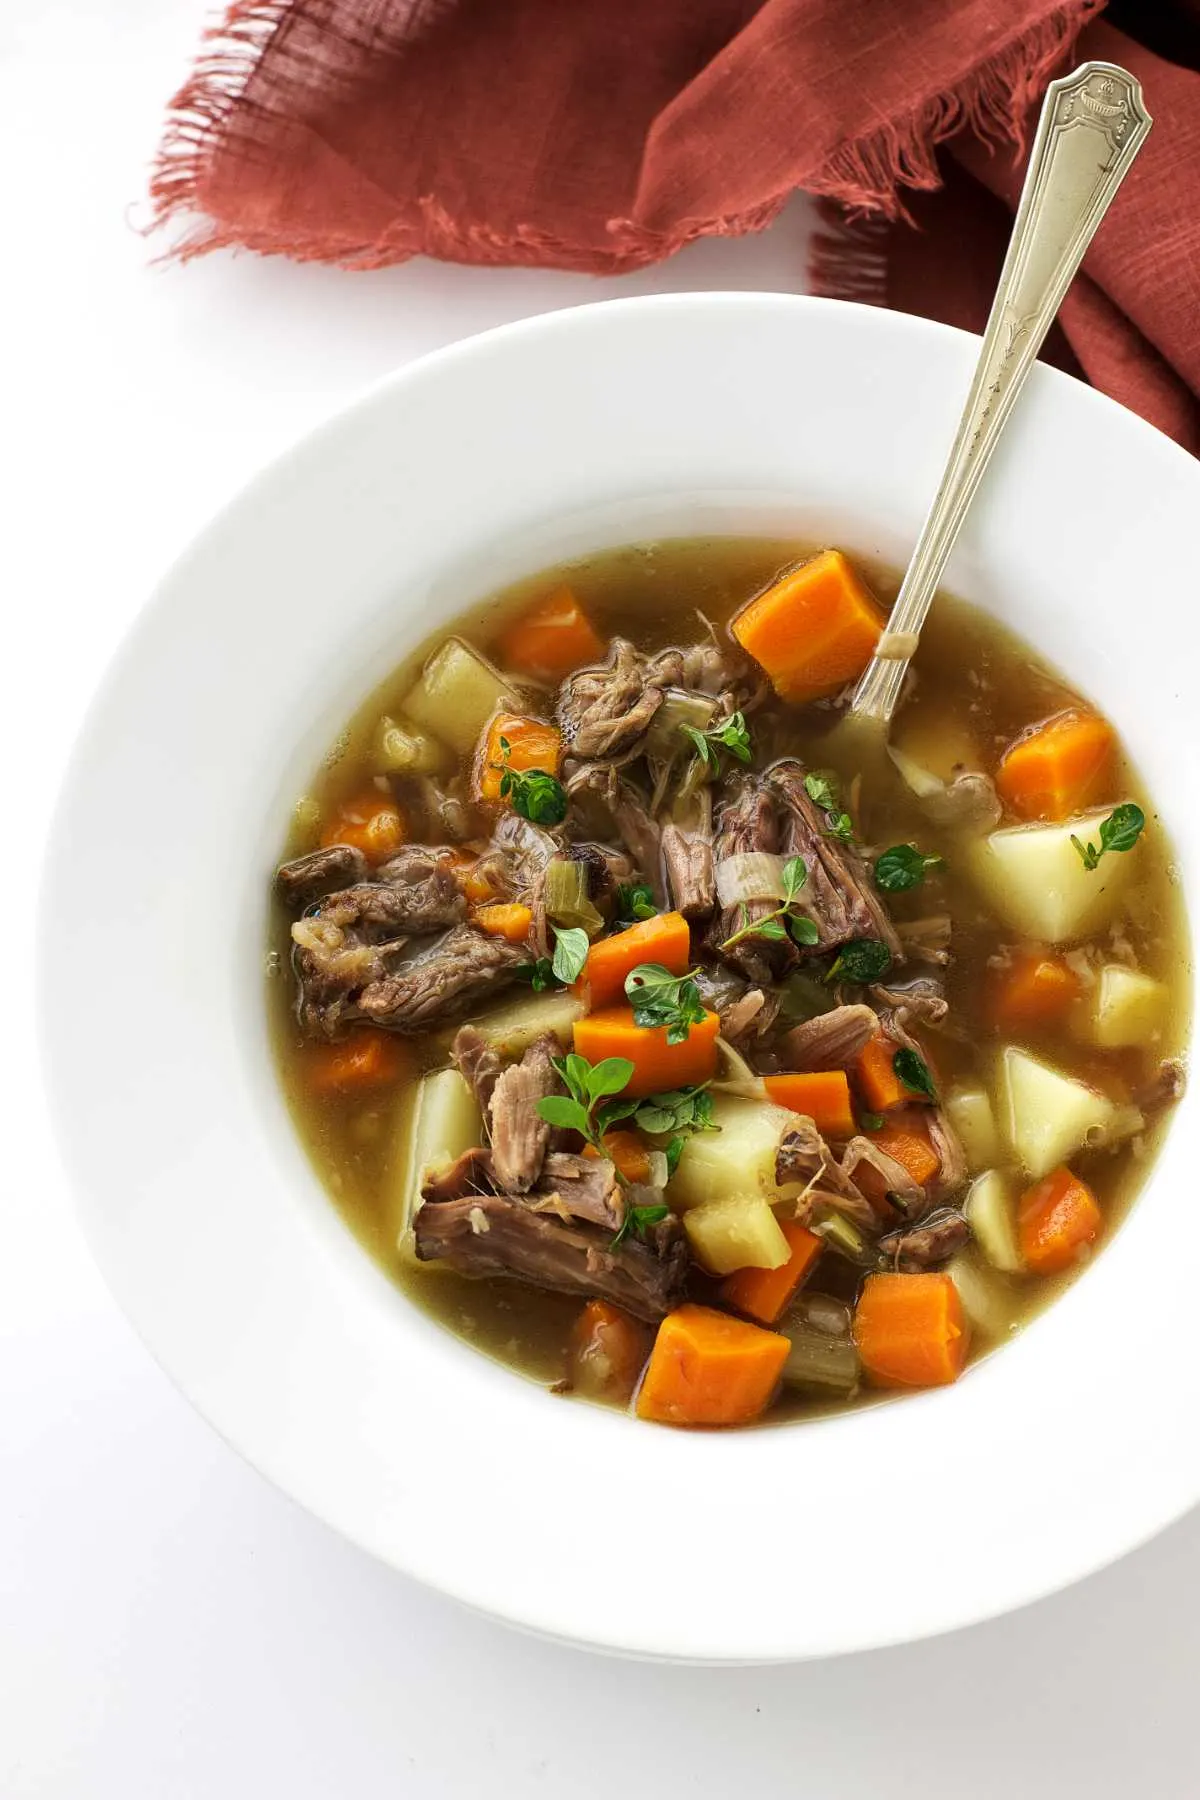 A bowl of oxtail soup with shredded oxtail meat and vegetables.